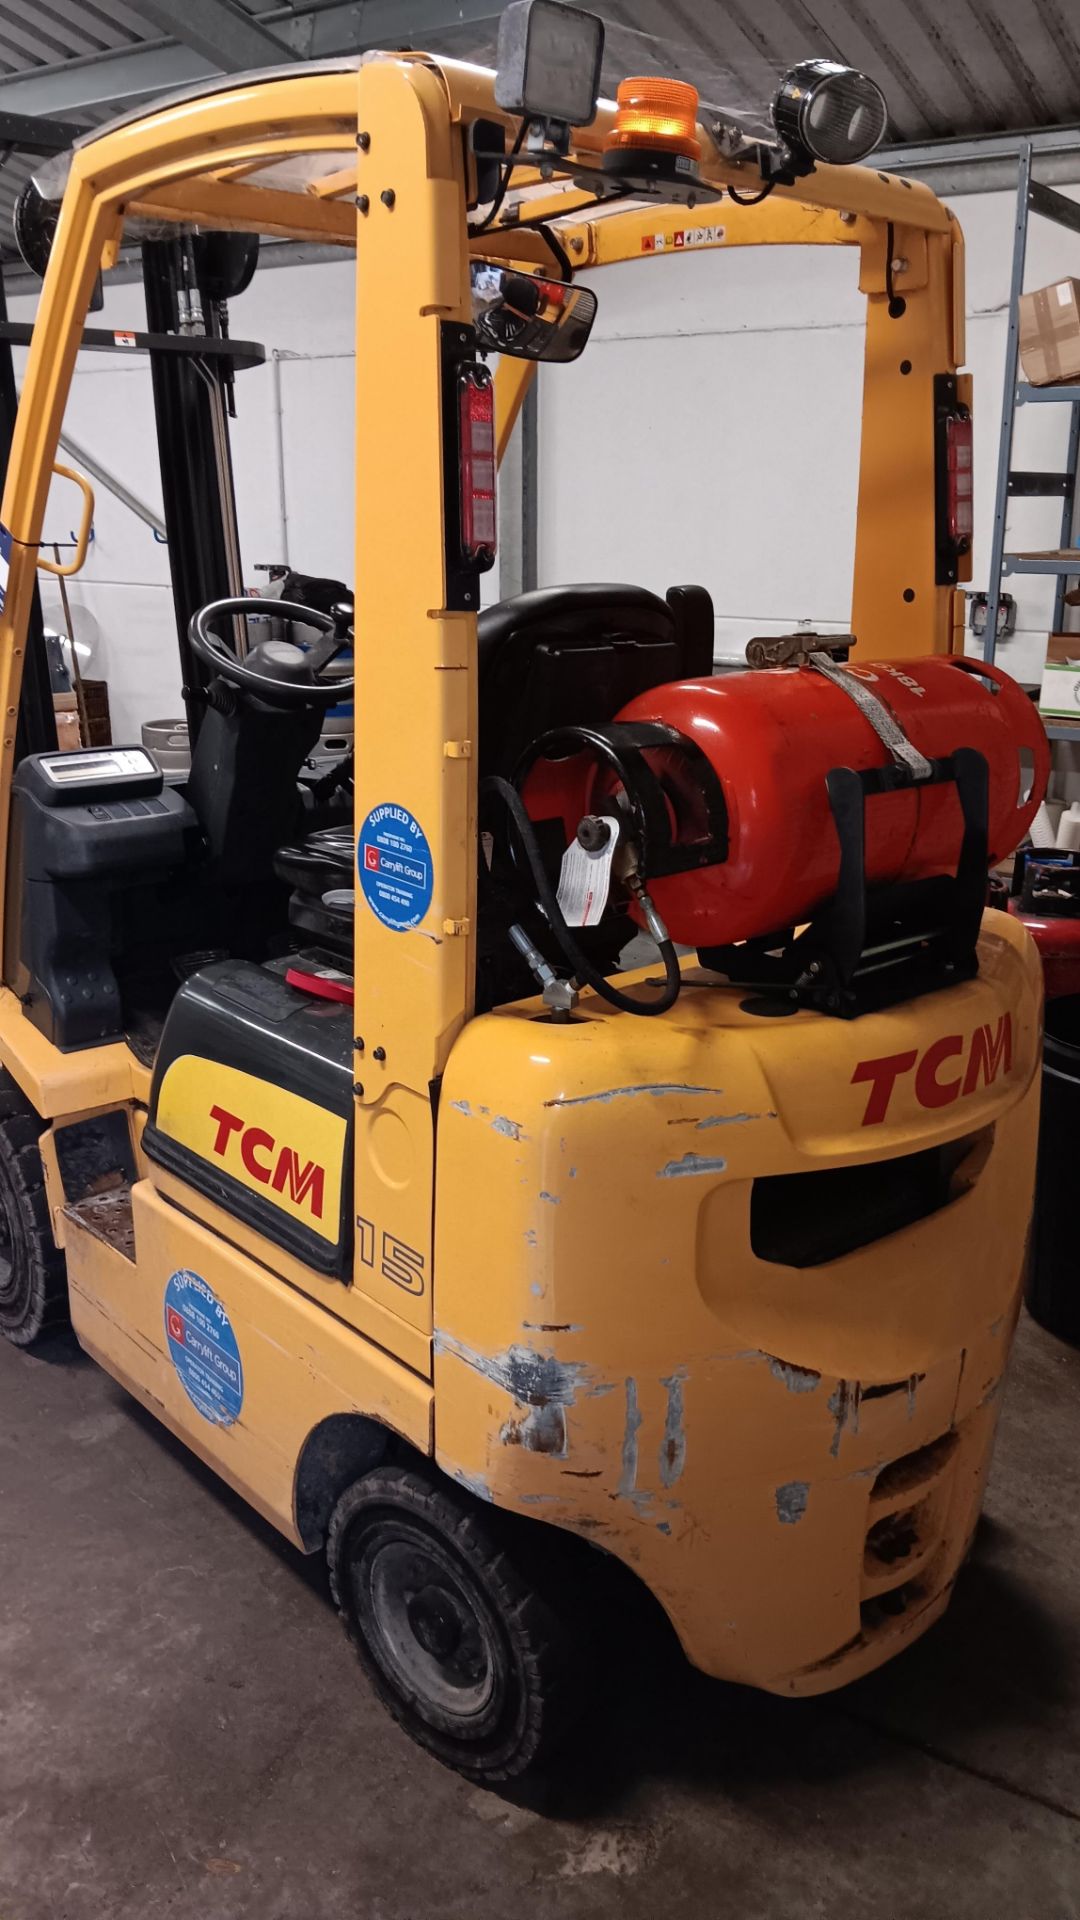 TCM 15 PID1A15LK 1.5ton SWL LPG forklift, serial number P1D1E704039 (2018) fitted side shift, 819 - Image 4 of 10